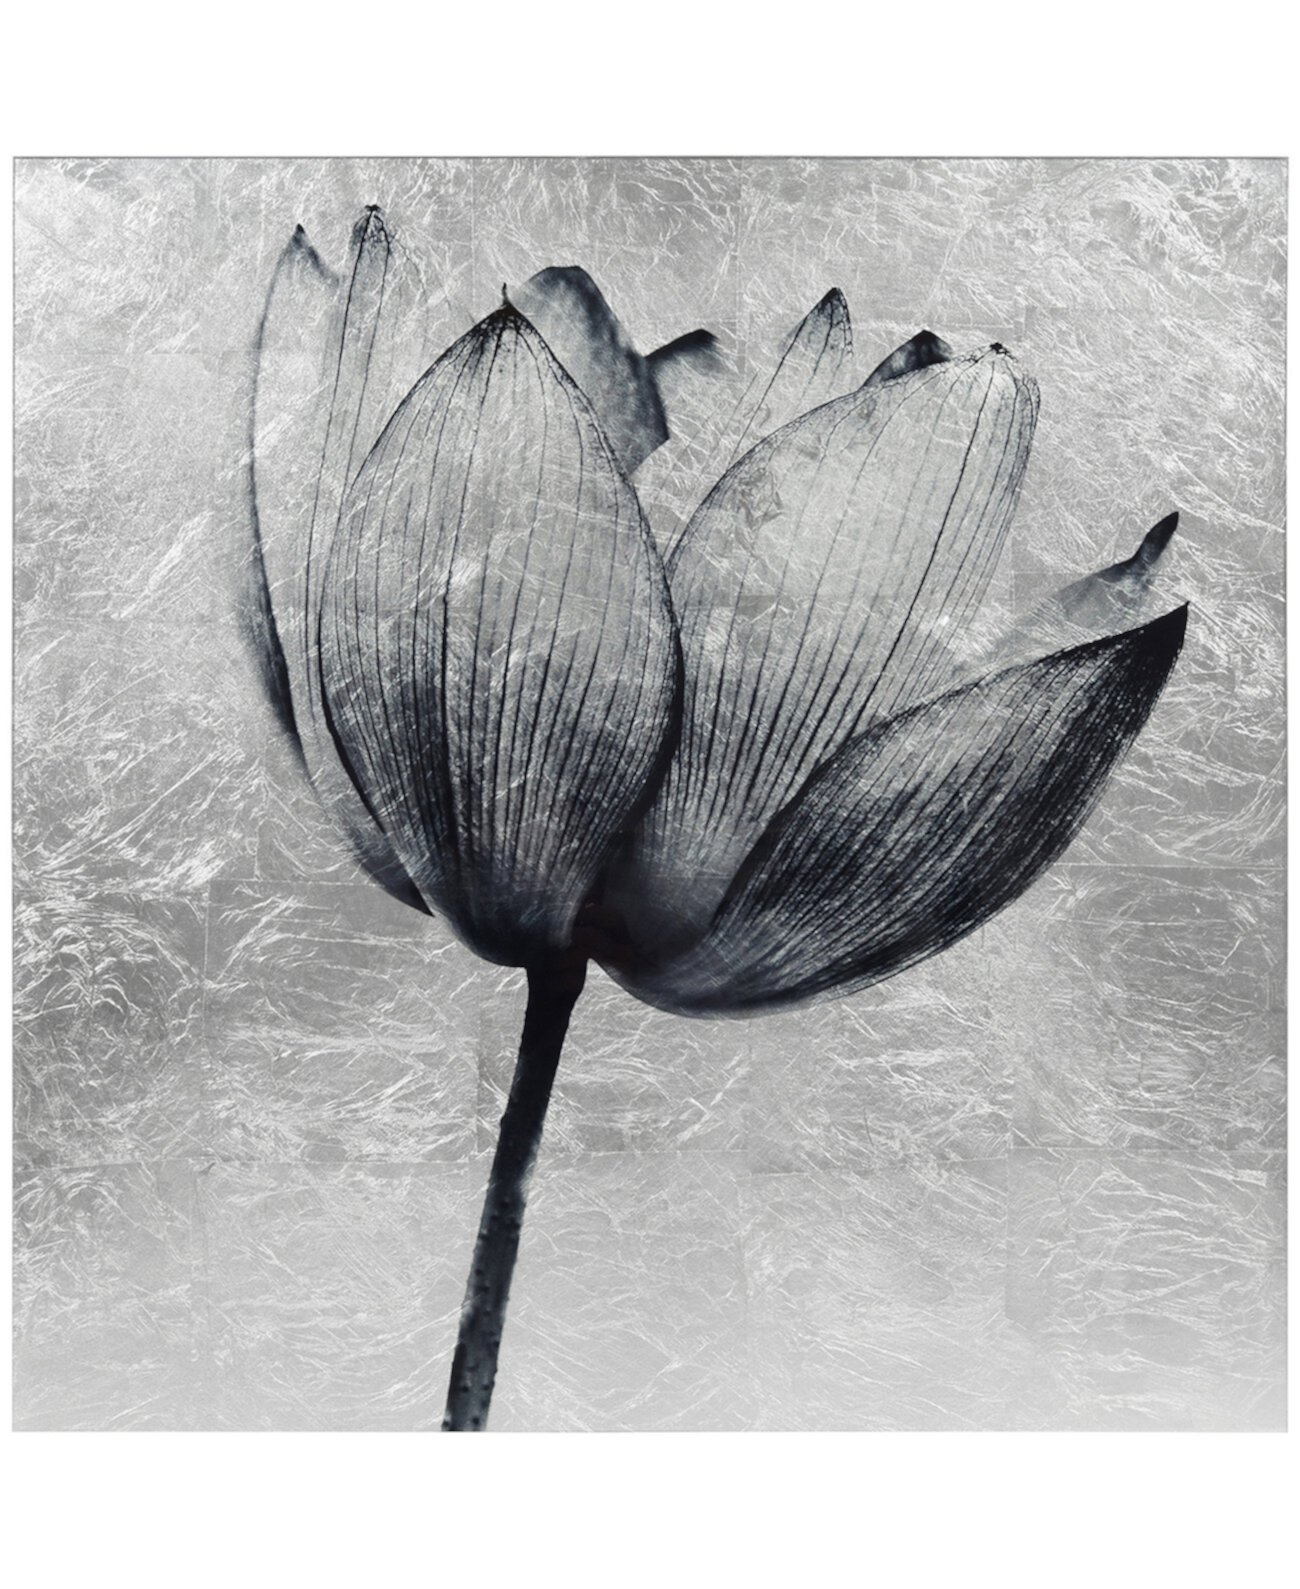 "Lotus" Reverse Printed Tempered Glass Leaf, 24" x 24" x 0.2" Empire Art Direct